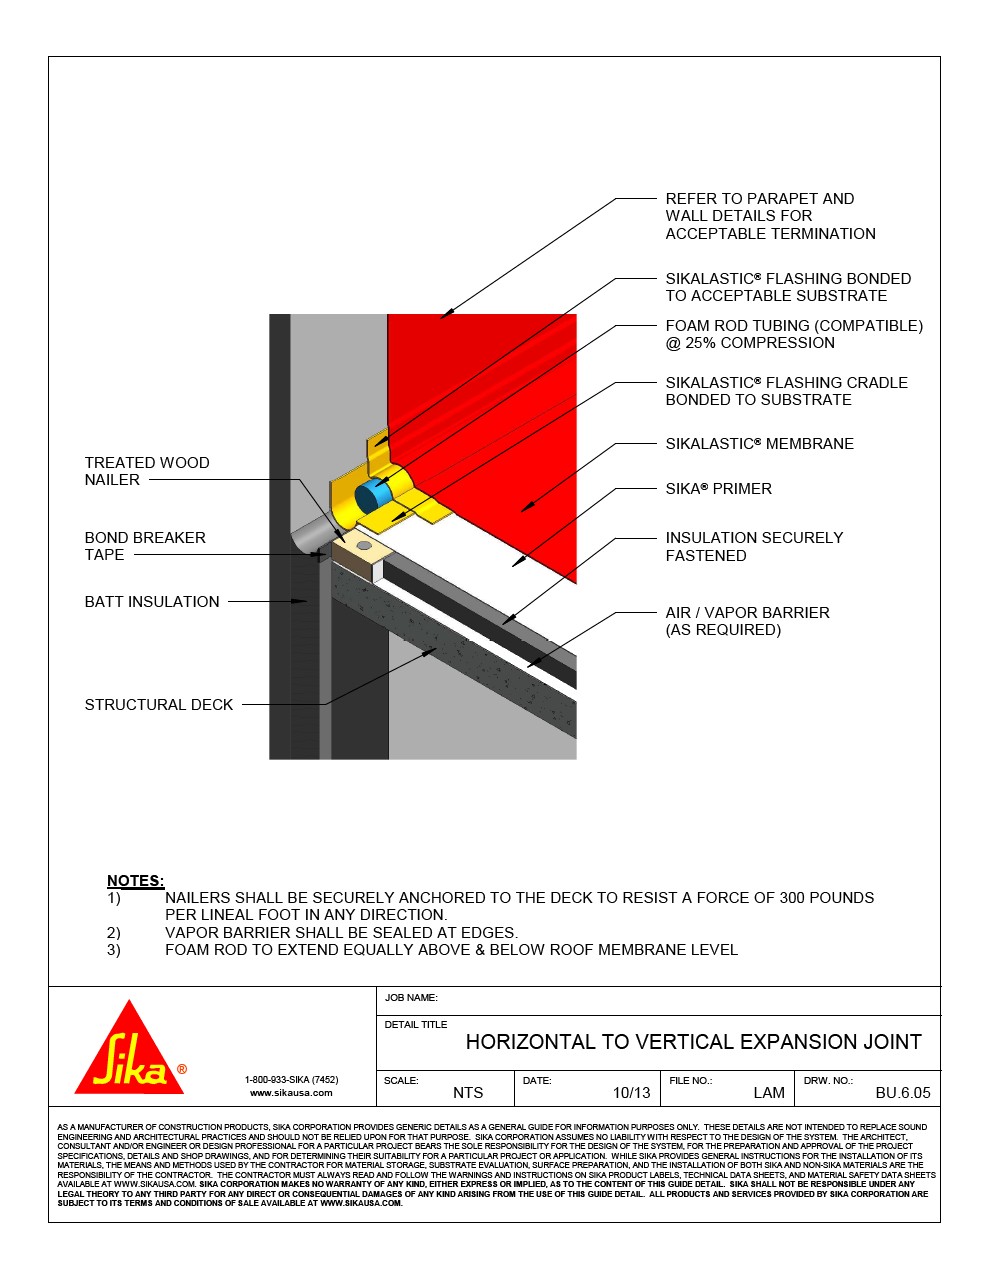 Horizontal to Vertical Expansion Joint 2D